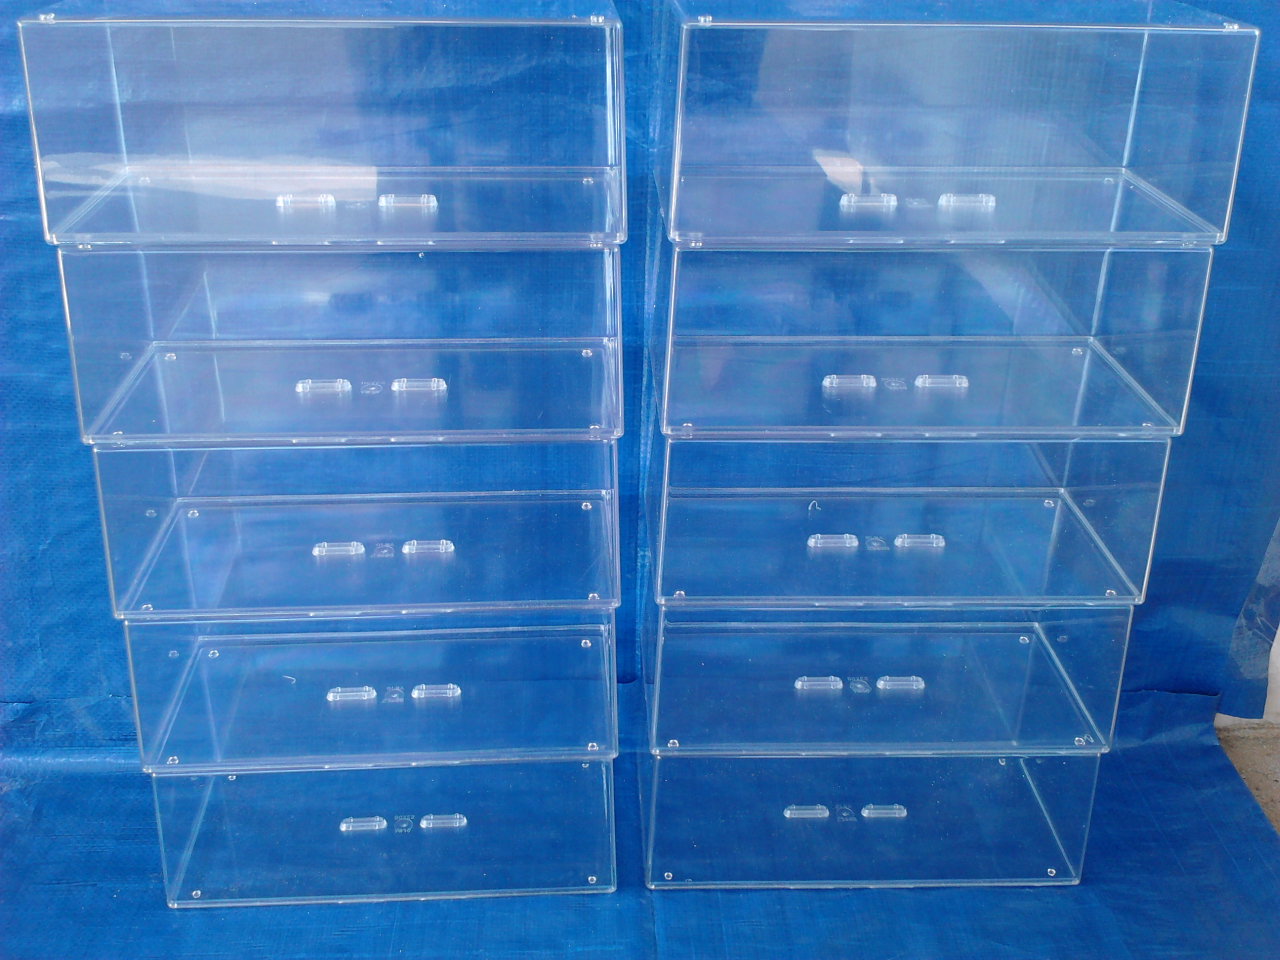 Clear Acrylic Diecast Model Car Display Case with Shelves 1:18 Scale - 3 Shelves / Clear Back Table Top